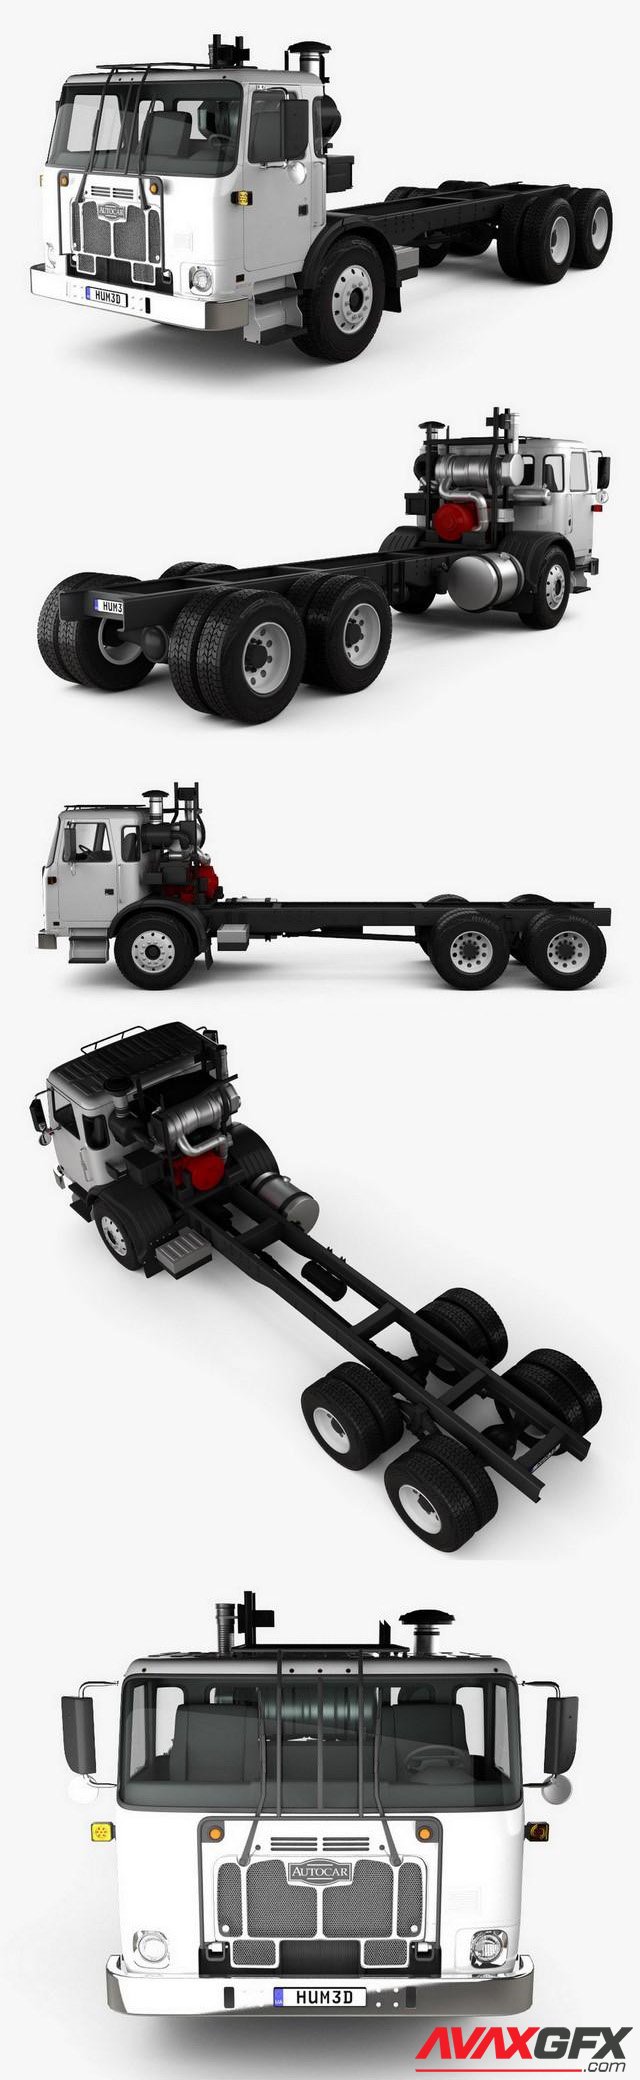 Autocar ACX Chassis Truck 2021